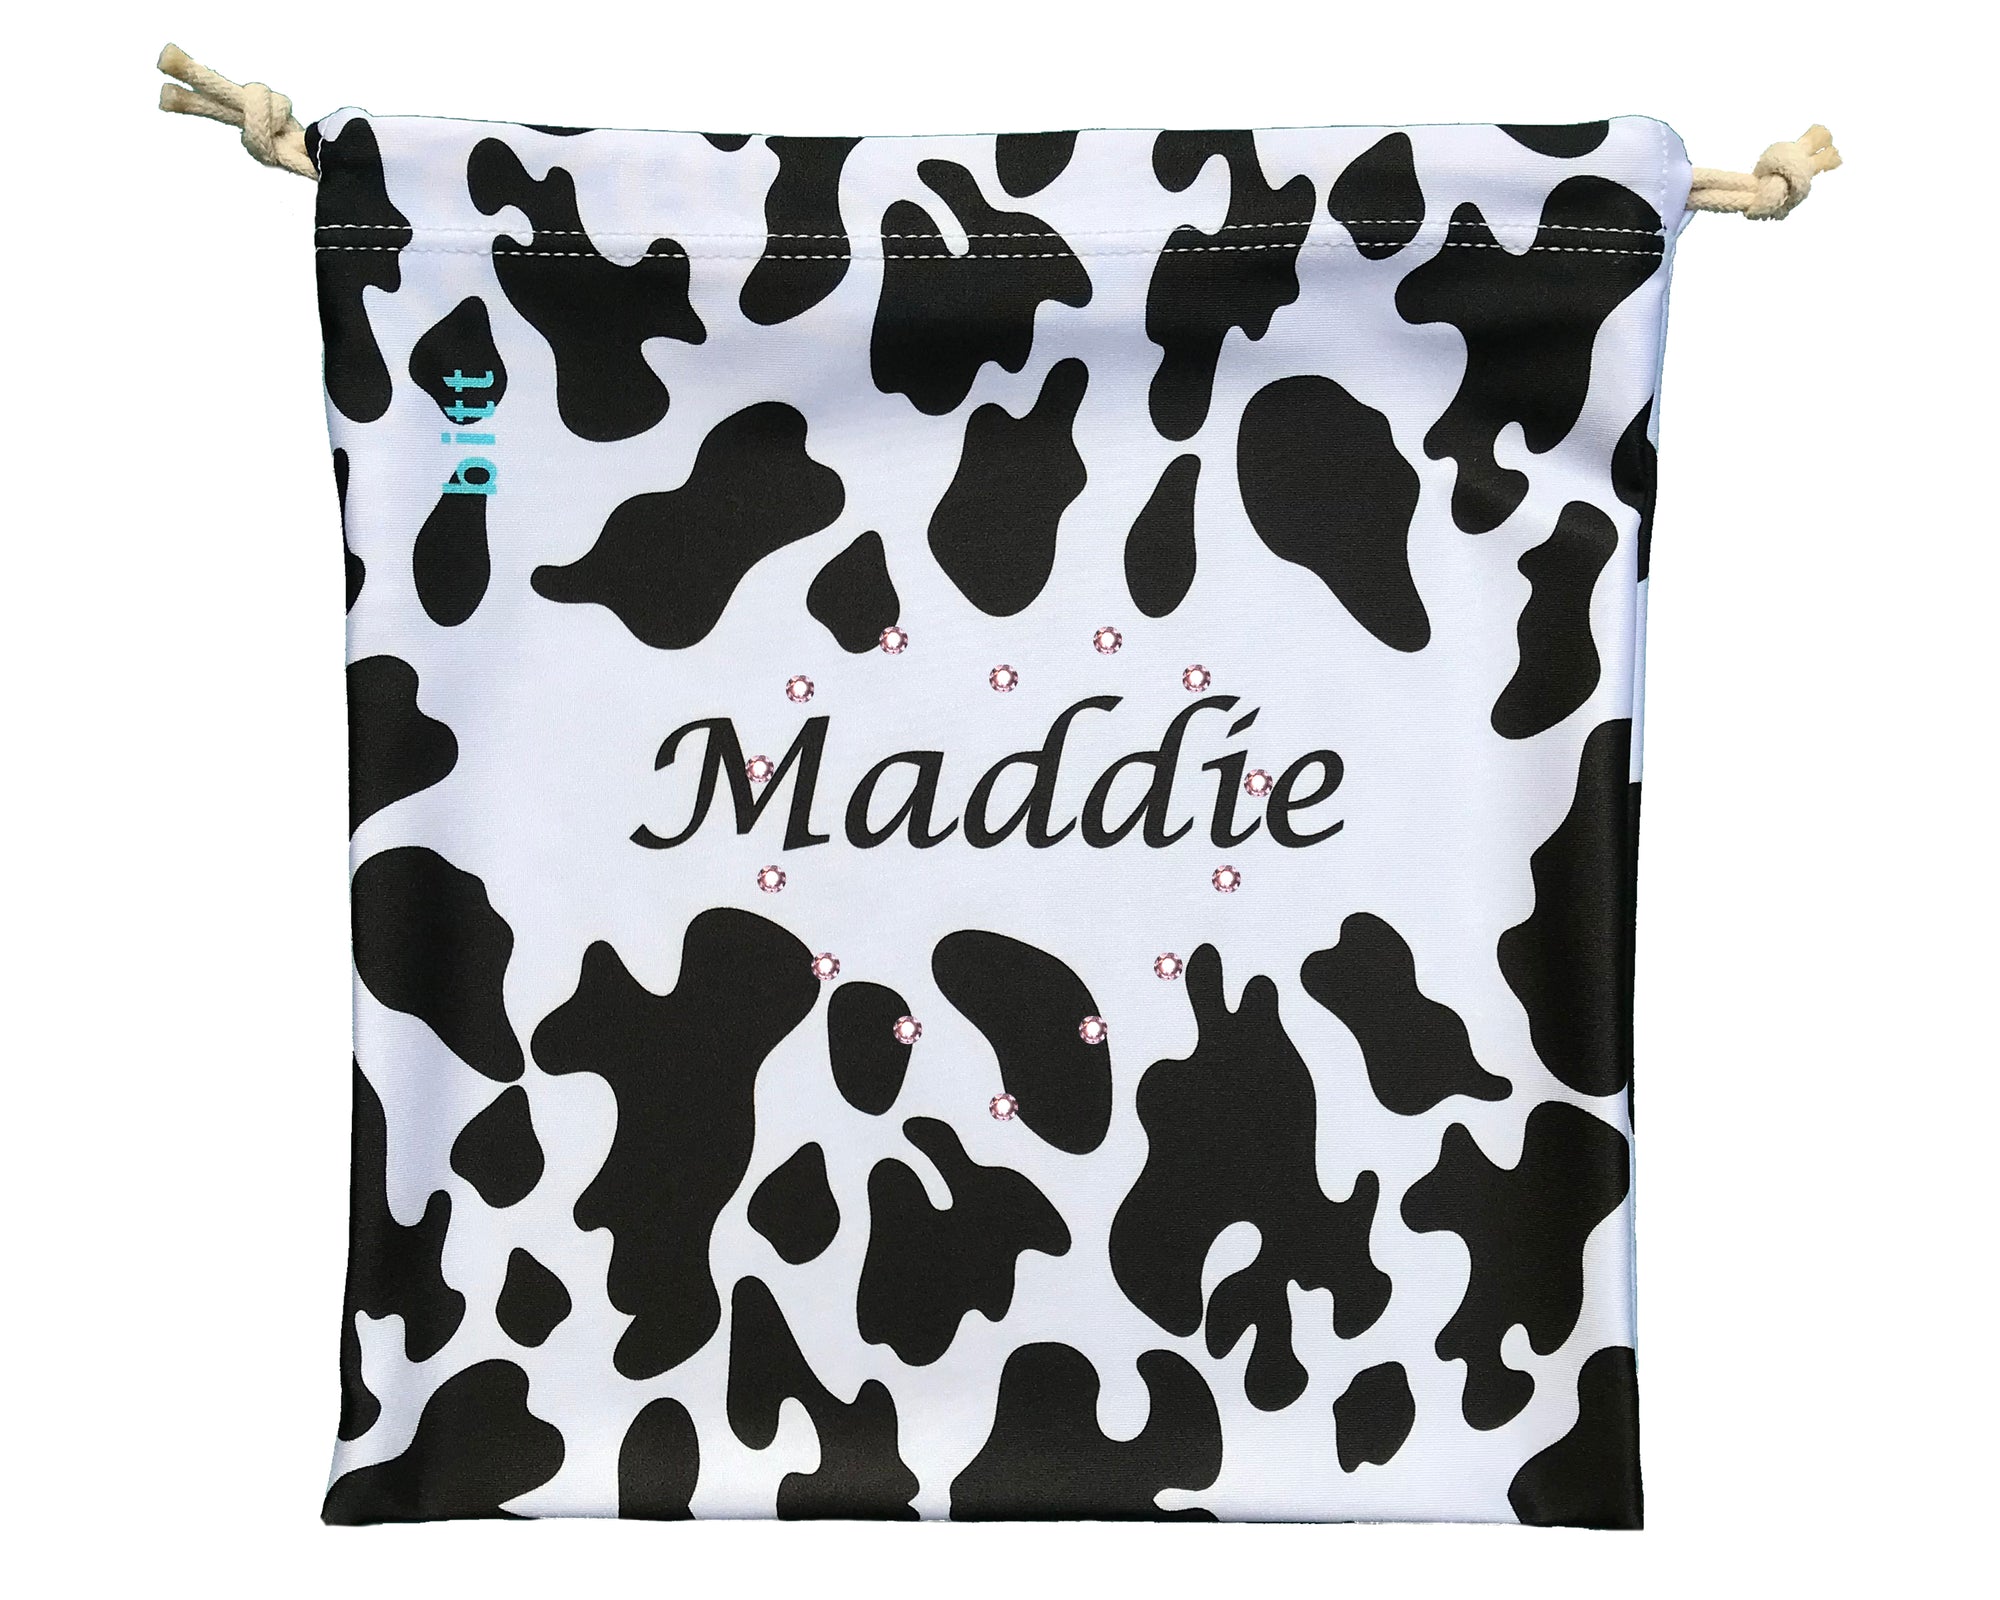 Personalized Gymnastics Grip Bag in Black & White Cow Print